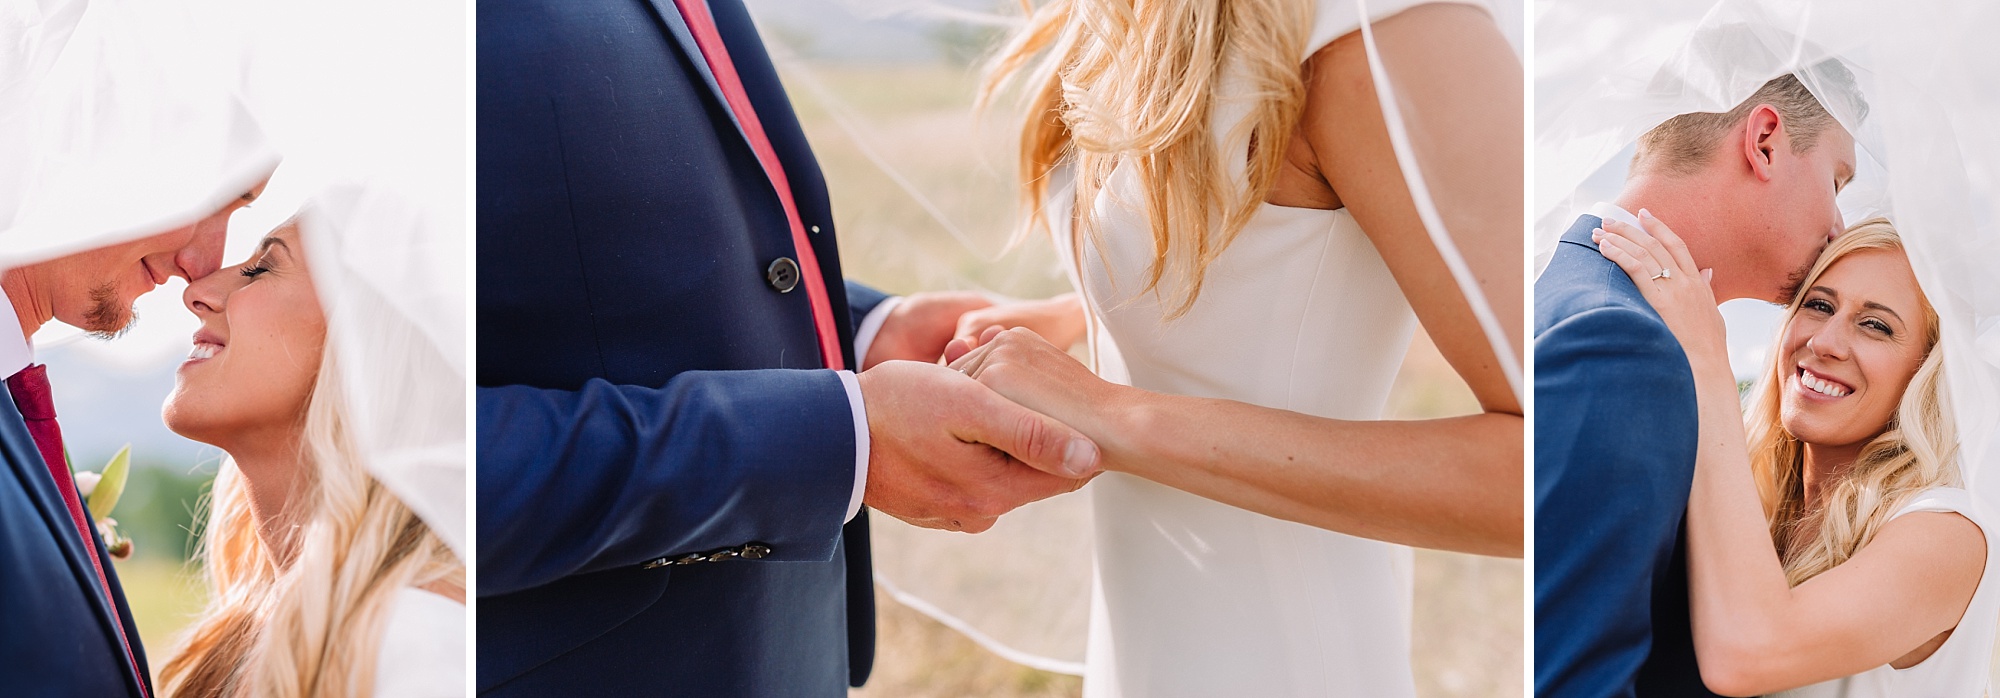 couple-holding-hands-on-wedding-day-first-look-romantic-destination-wedding